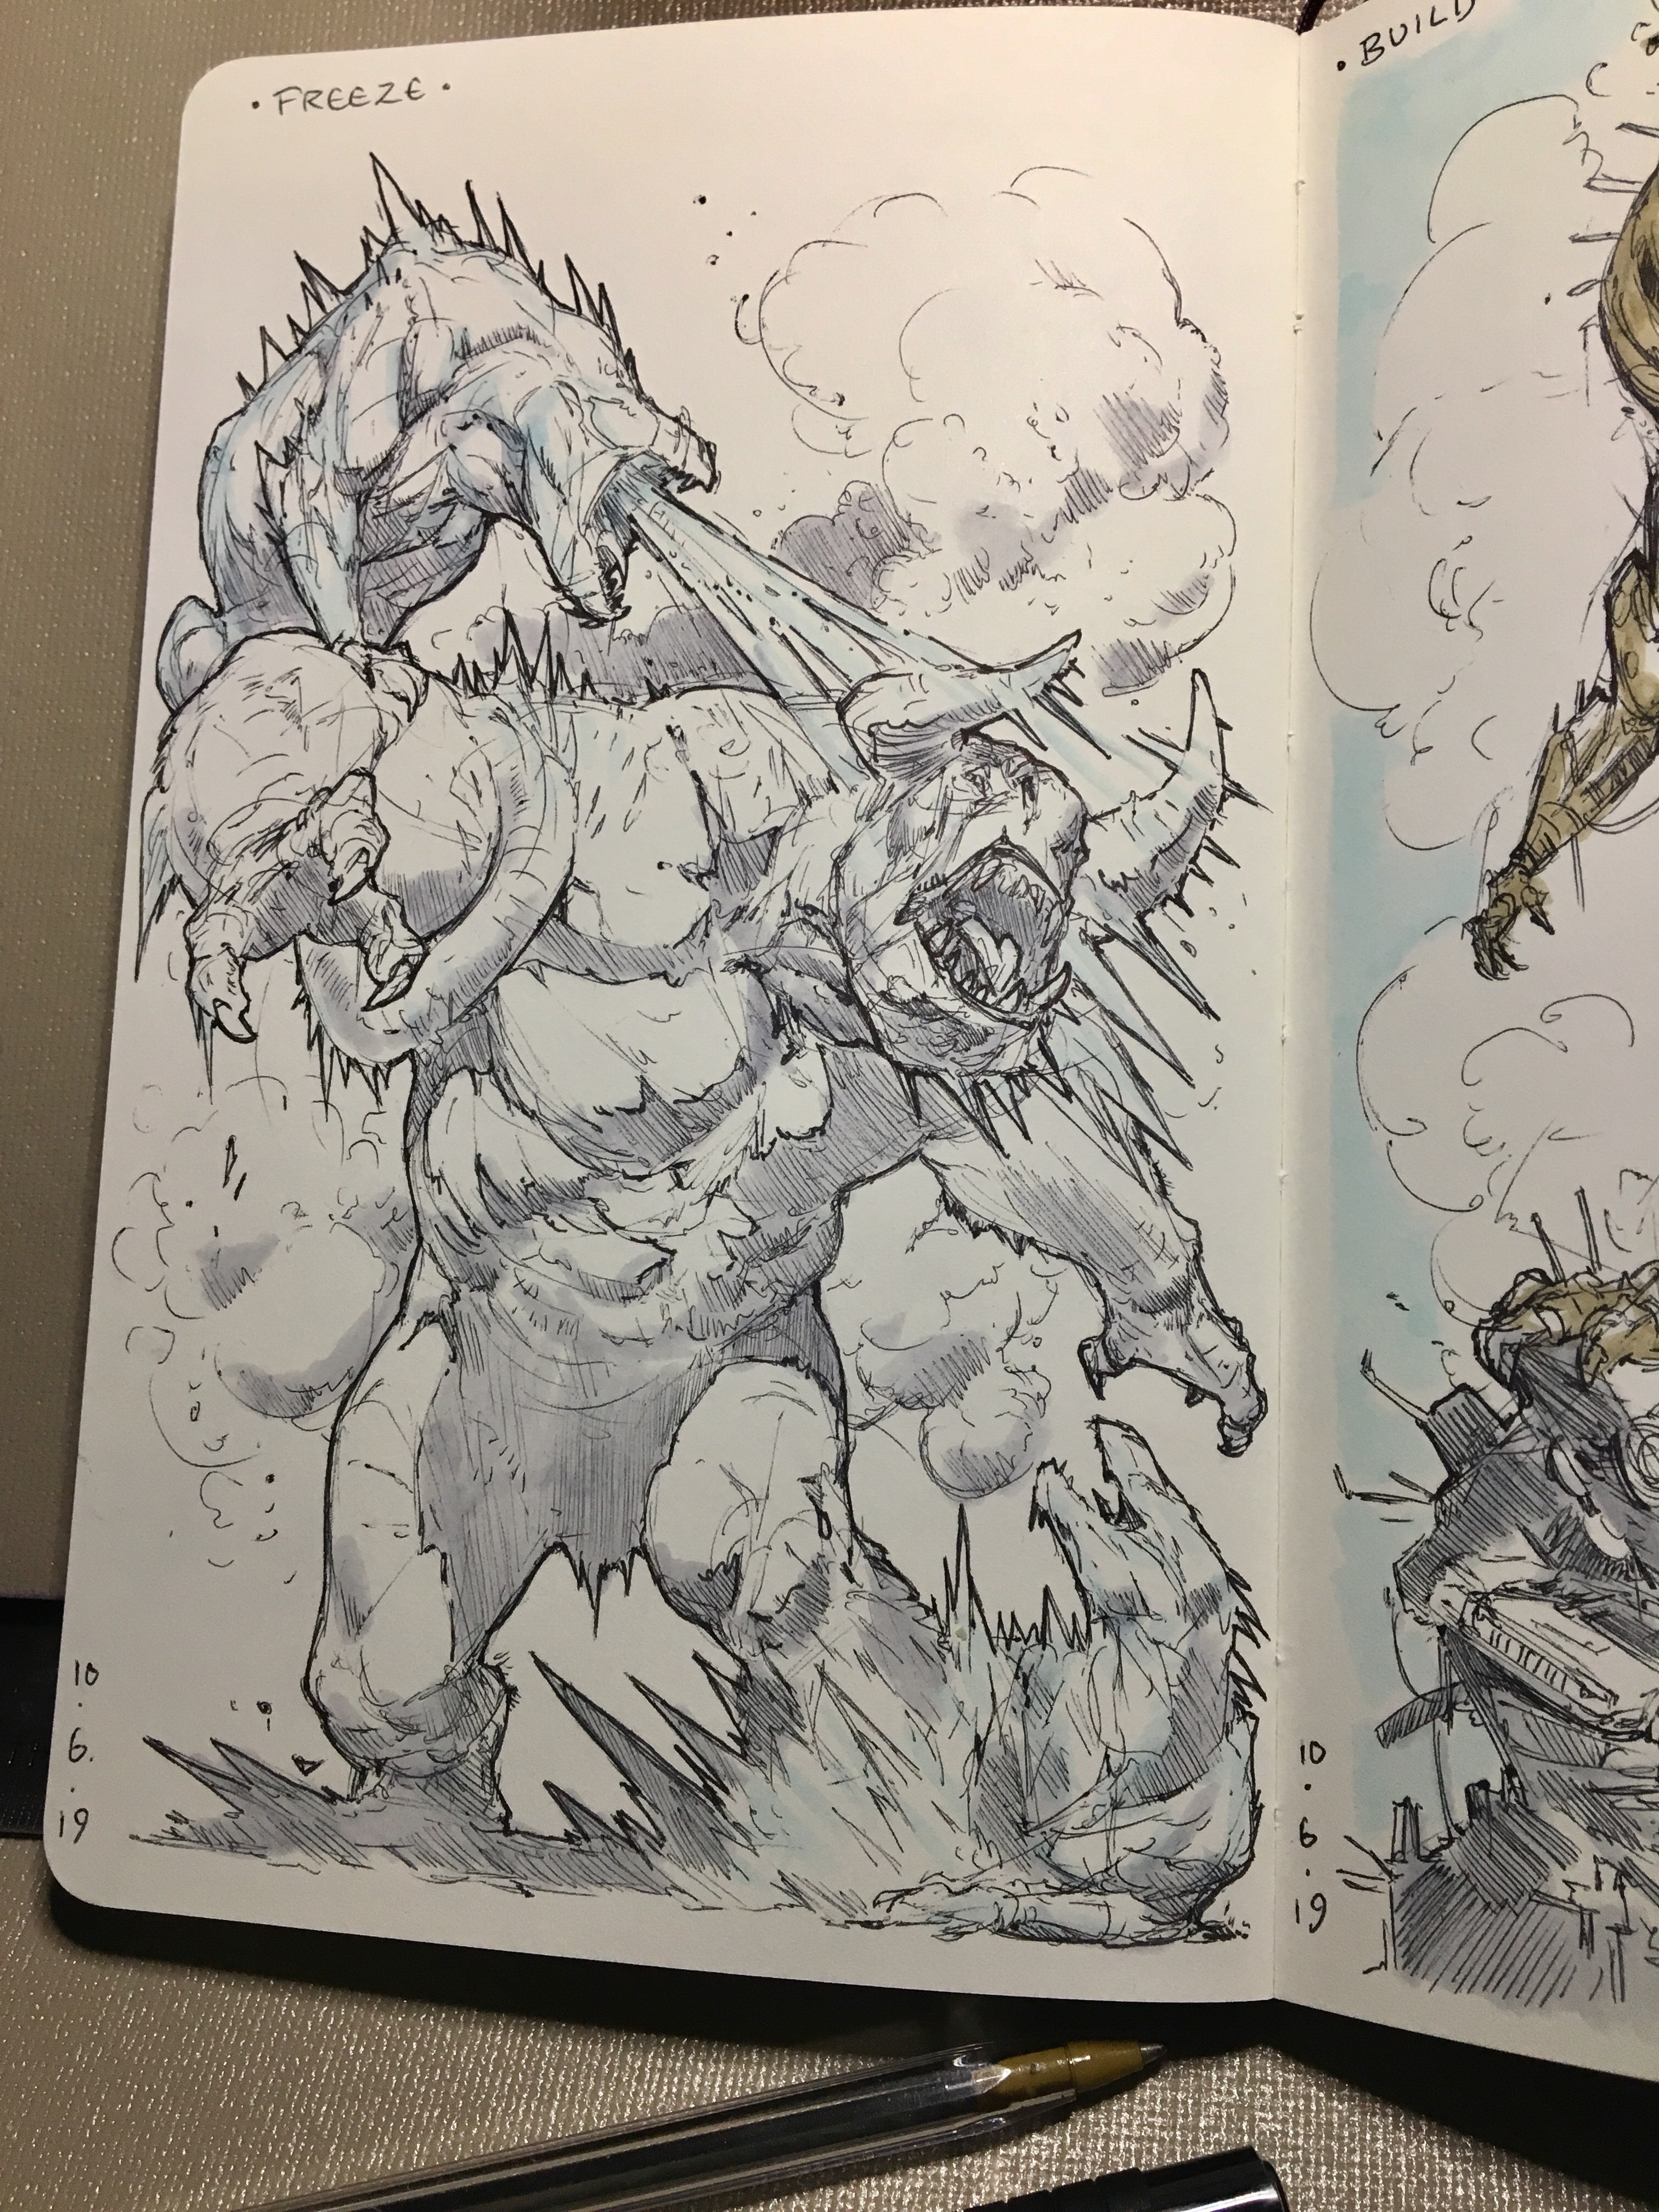 Day 4 of inktober 2019! Freeze! Looks like this troll picked a fight that he couldn’t win! 😨 